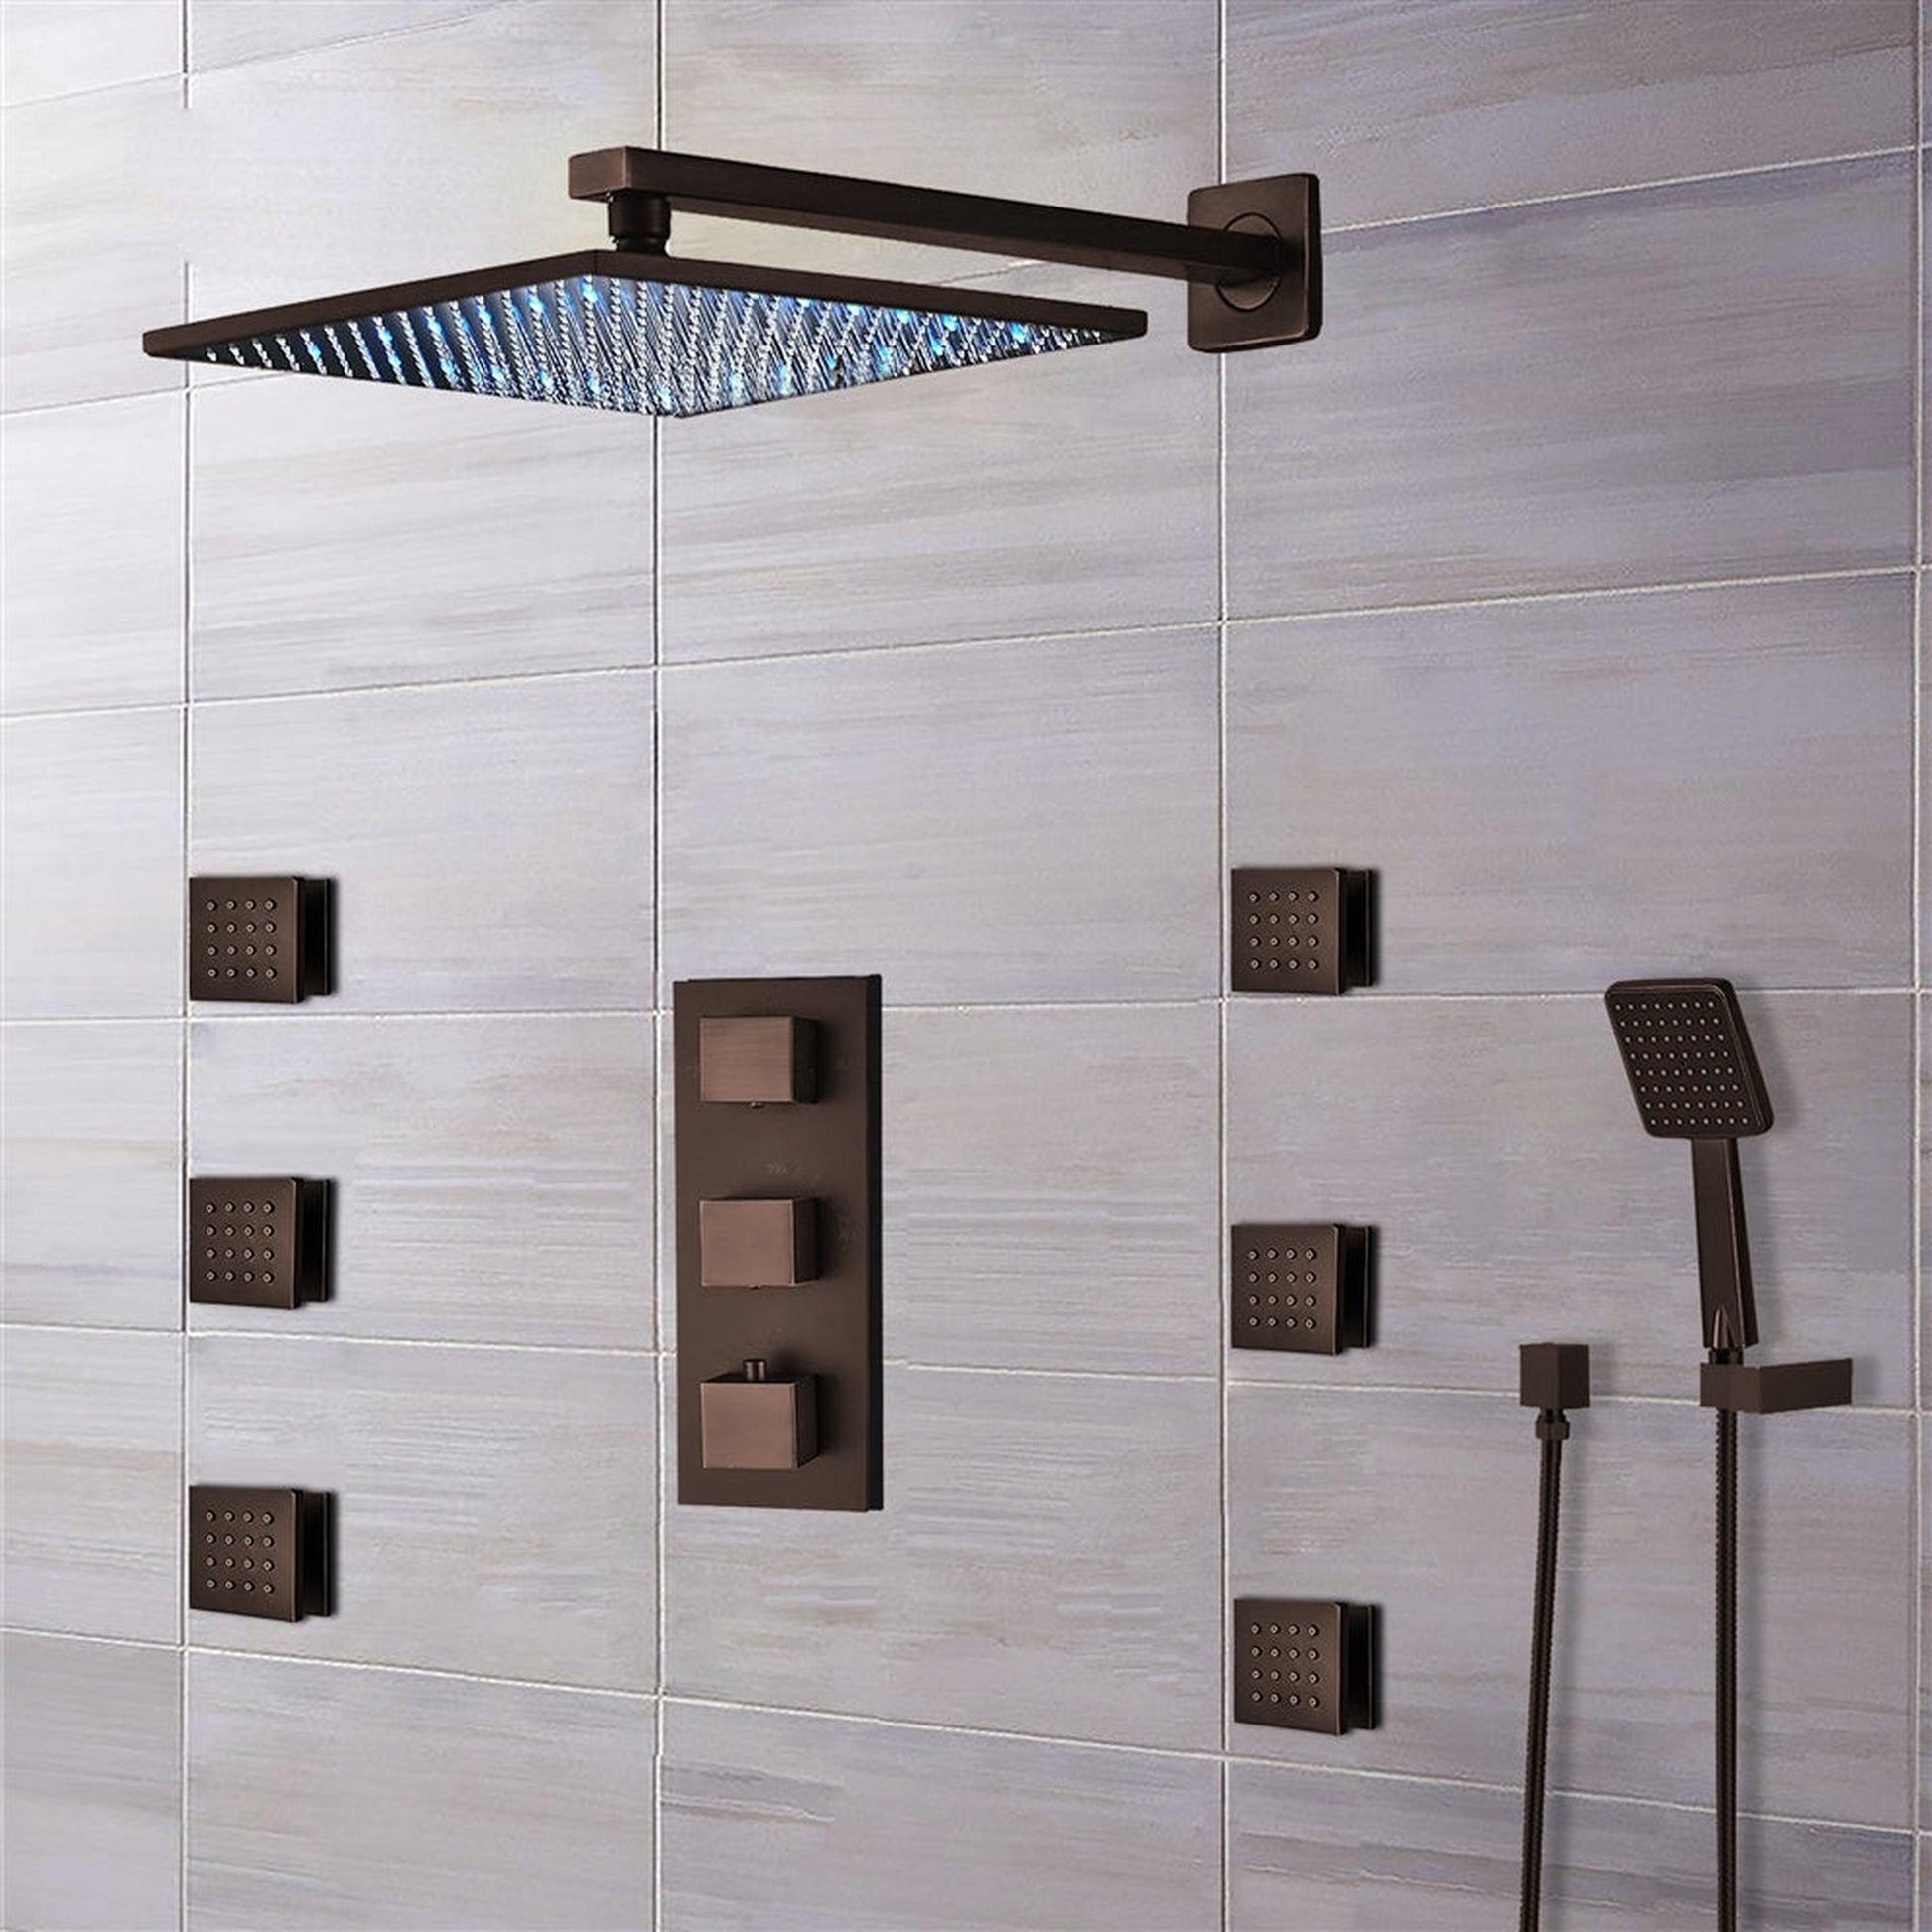 Fontana Sierra 12" Light Oil Rubbed Bronze Square Ceiling-Mounted LED Shower System With 6-Jet Body Sprays and Hand Shower